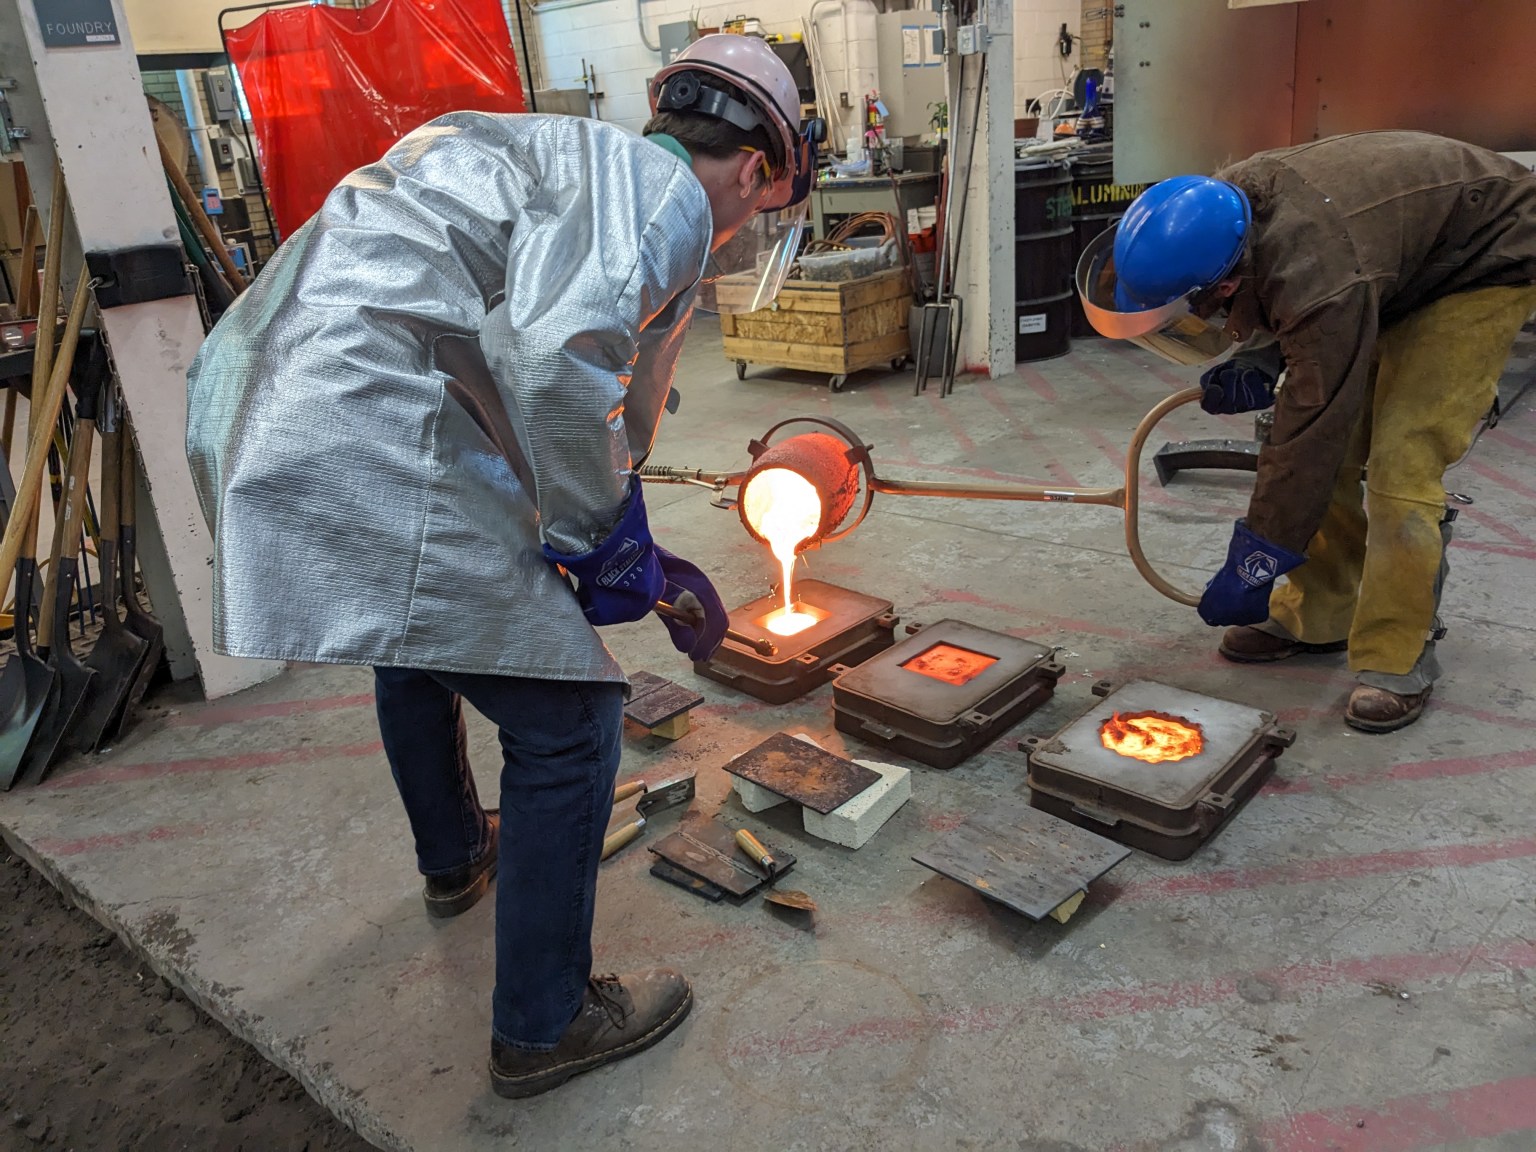 Colorado School of Mines team members pouring regolith slag into tile sandcasting molds to review applicability for use as building products in the 2023 BIG Idea Challenge.